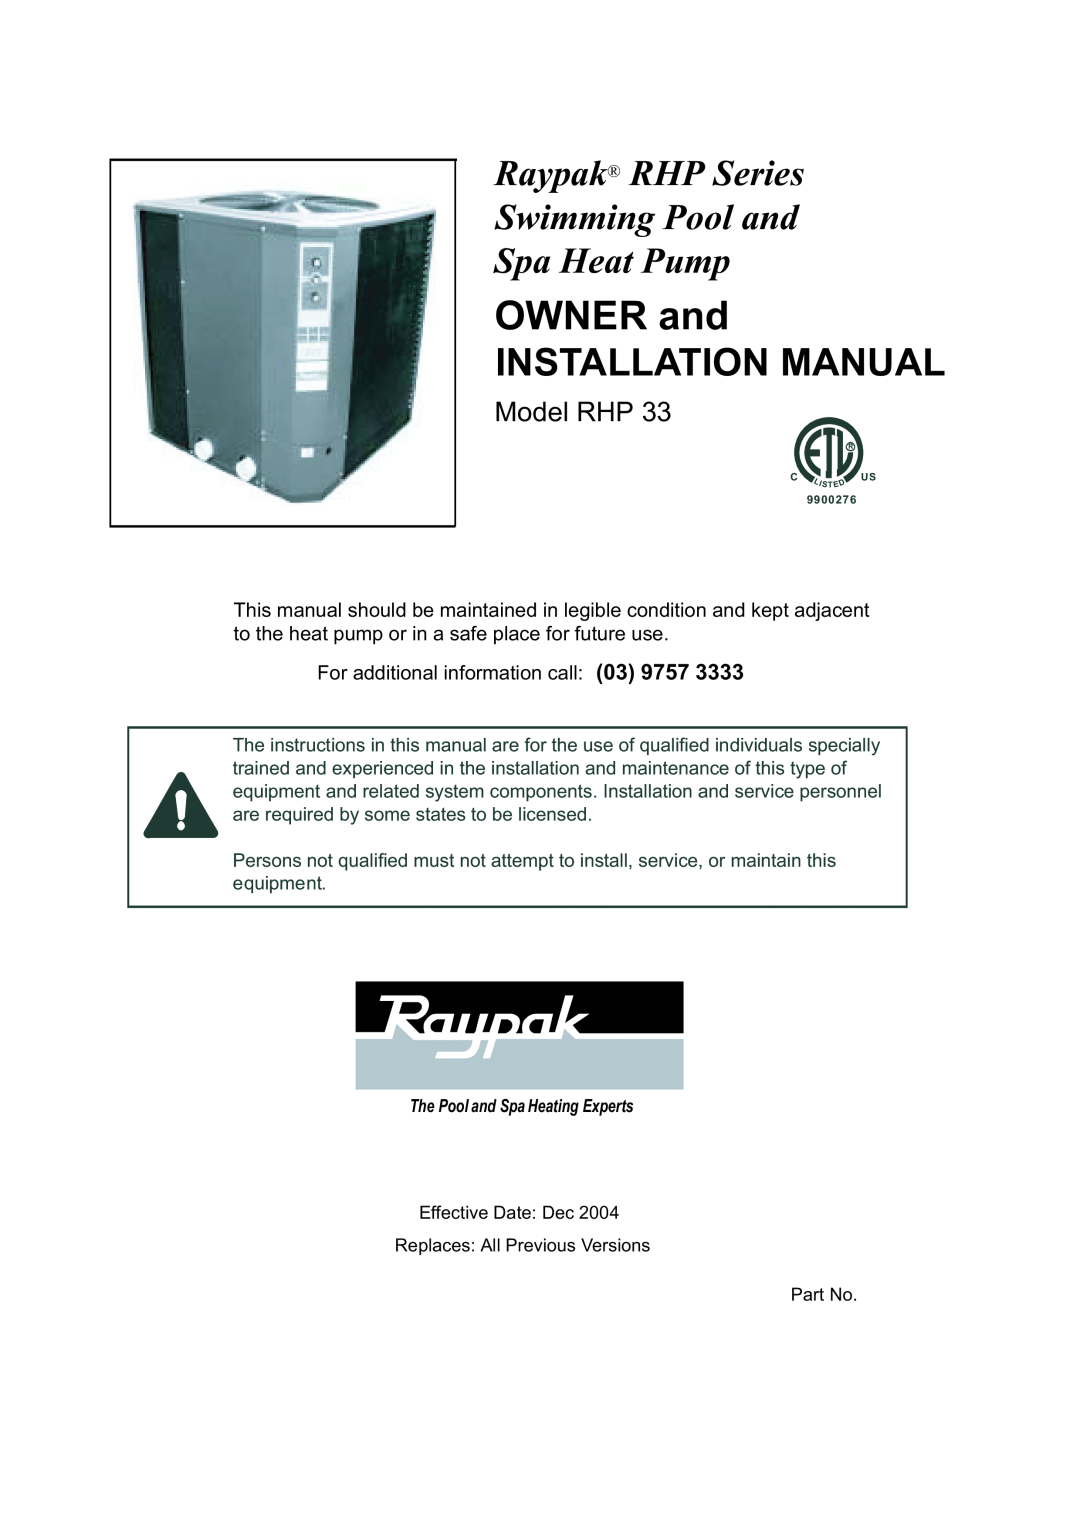 Raypak RHP 33 installation manual OWNER and, Installation Manual, Raypak RHP Series Swimming Pool and Spa Heat Pump 